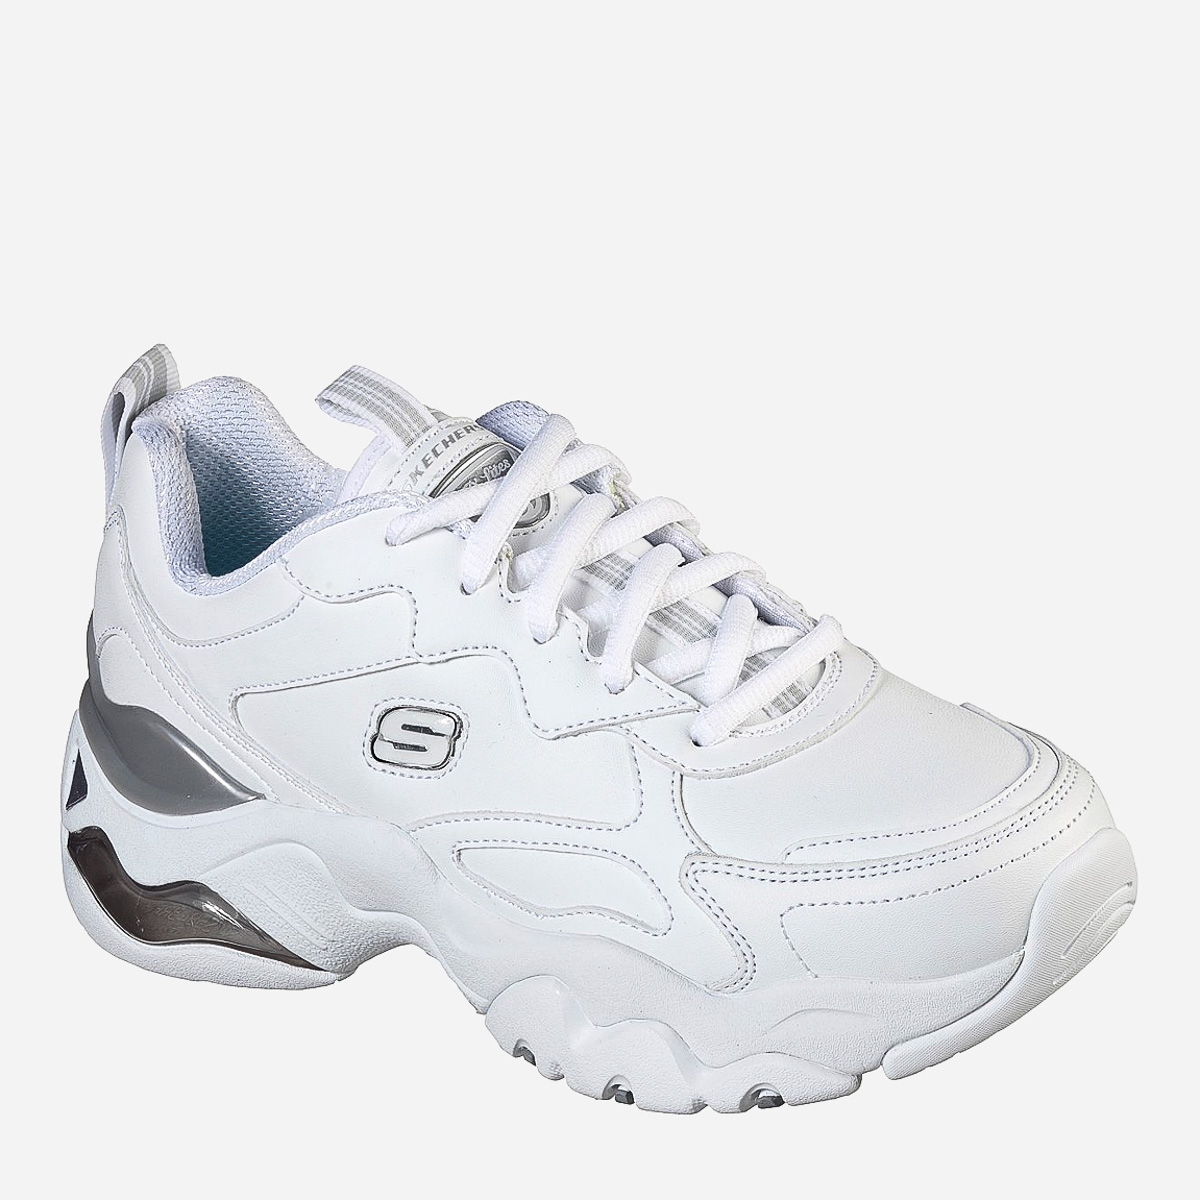 skechers shoes sale philippines